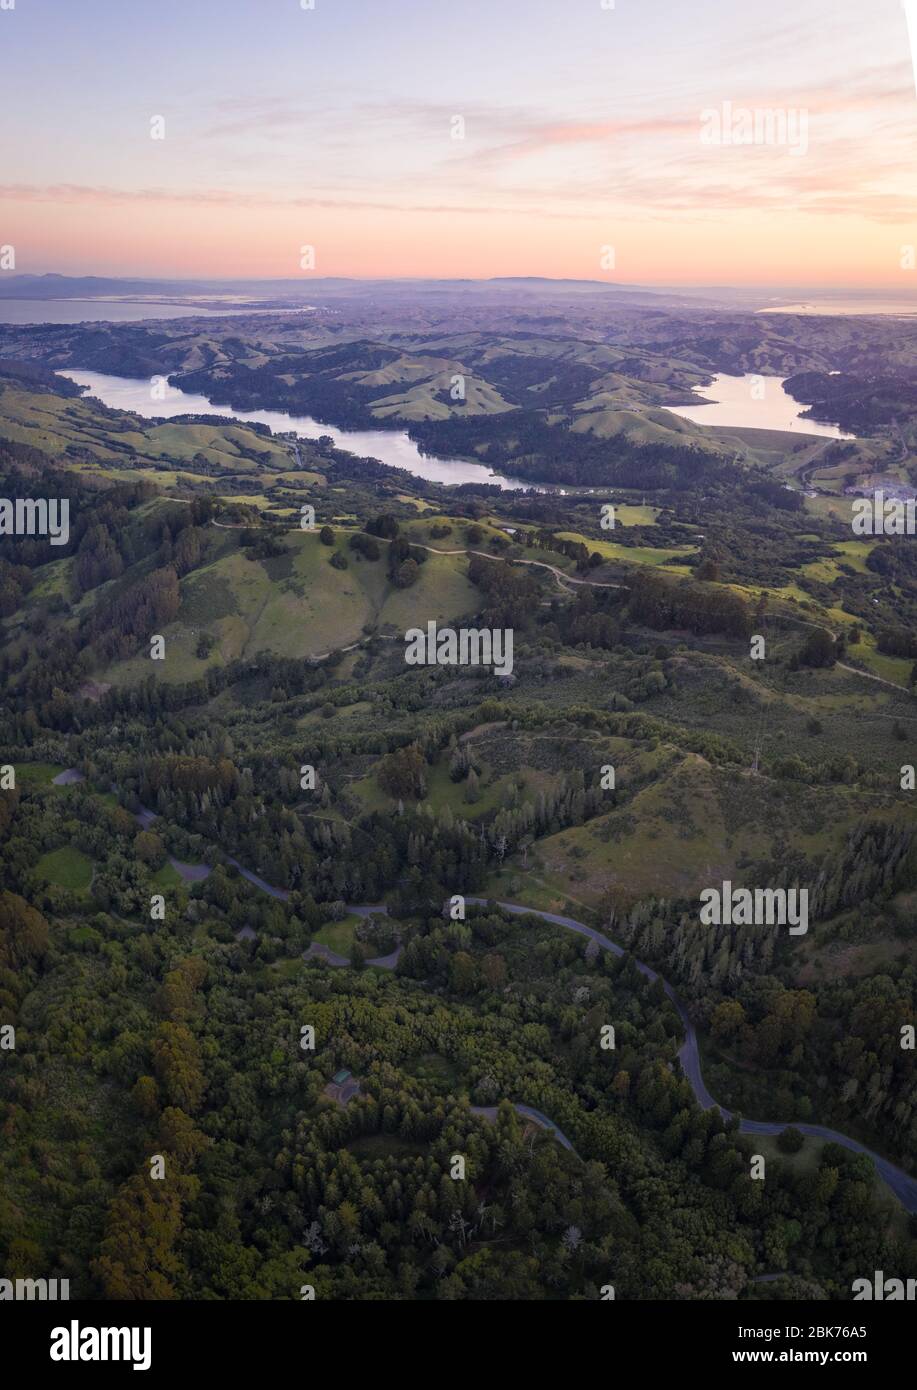 A calm sunrise greets the tranquil, green hills and reservoirs of the East Bay region of Northern California, just east of San Francisco Bay. Stock Photo